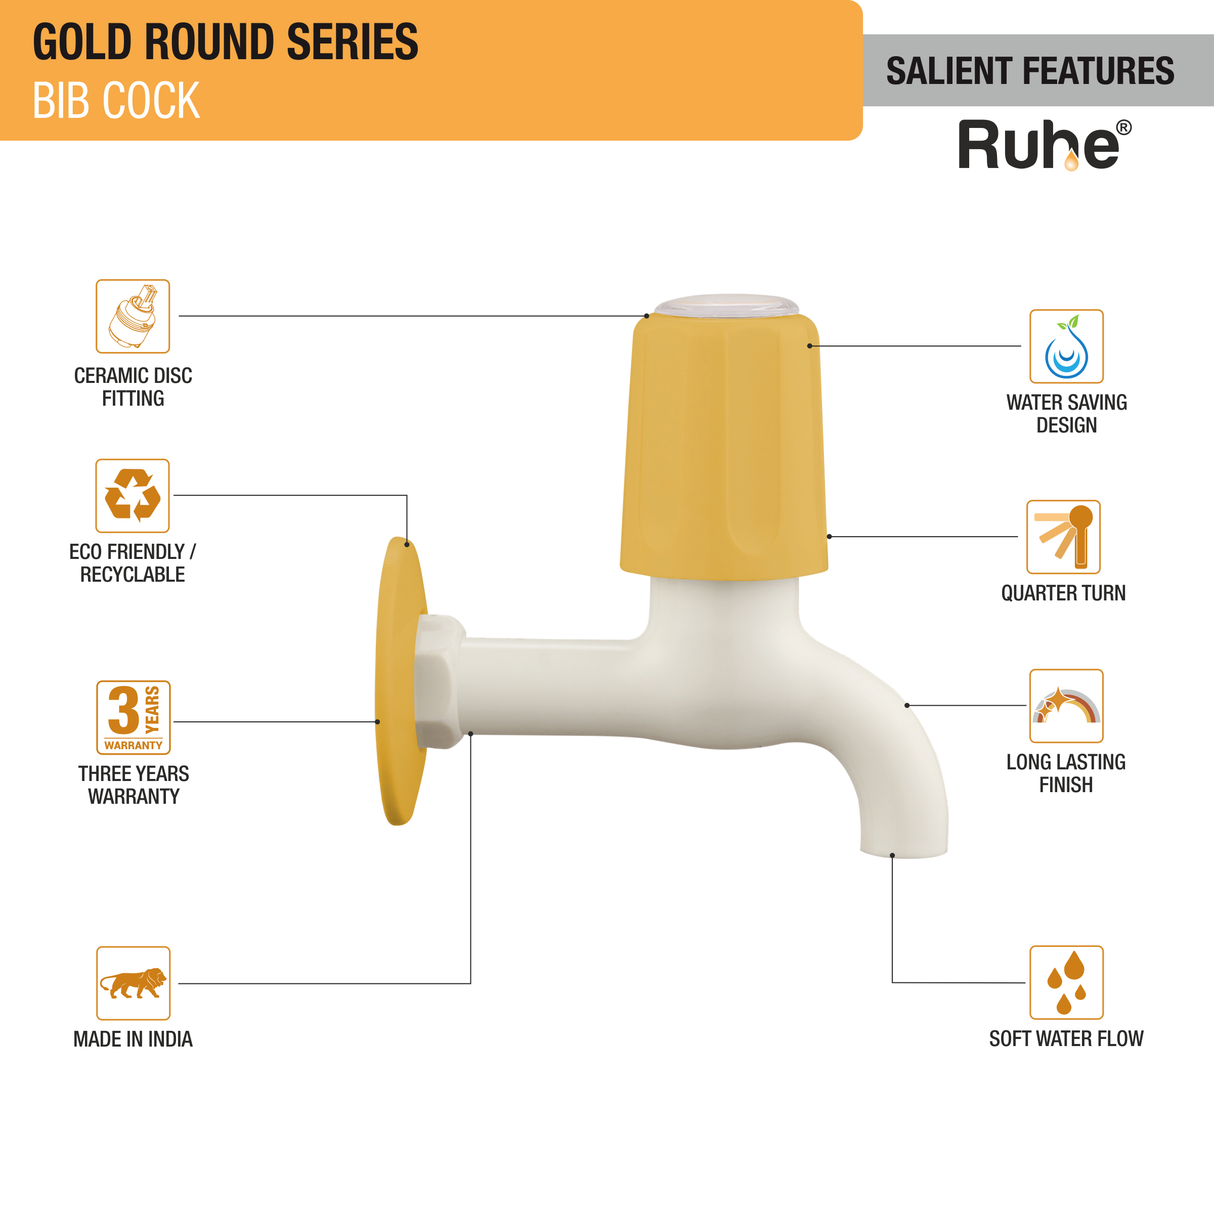 Gold Round PTMT Bib Cock Faucet features